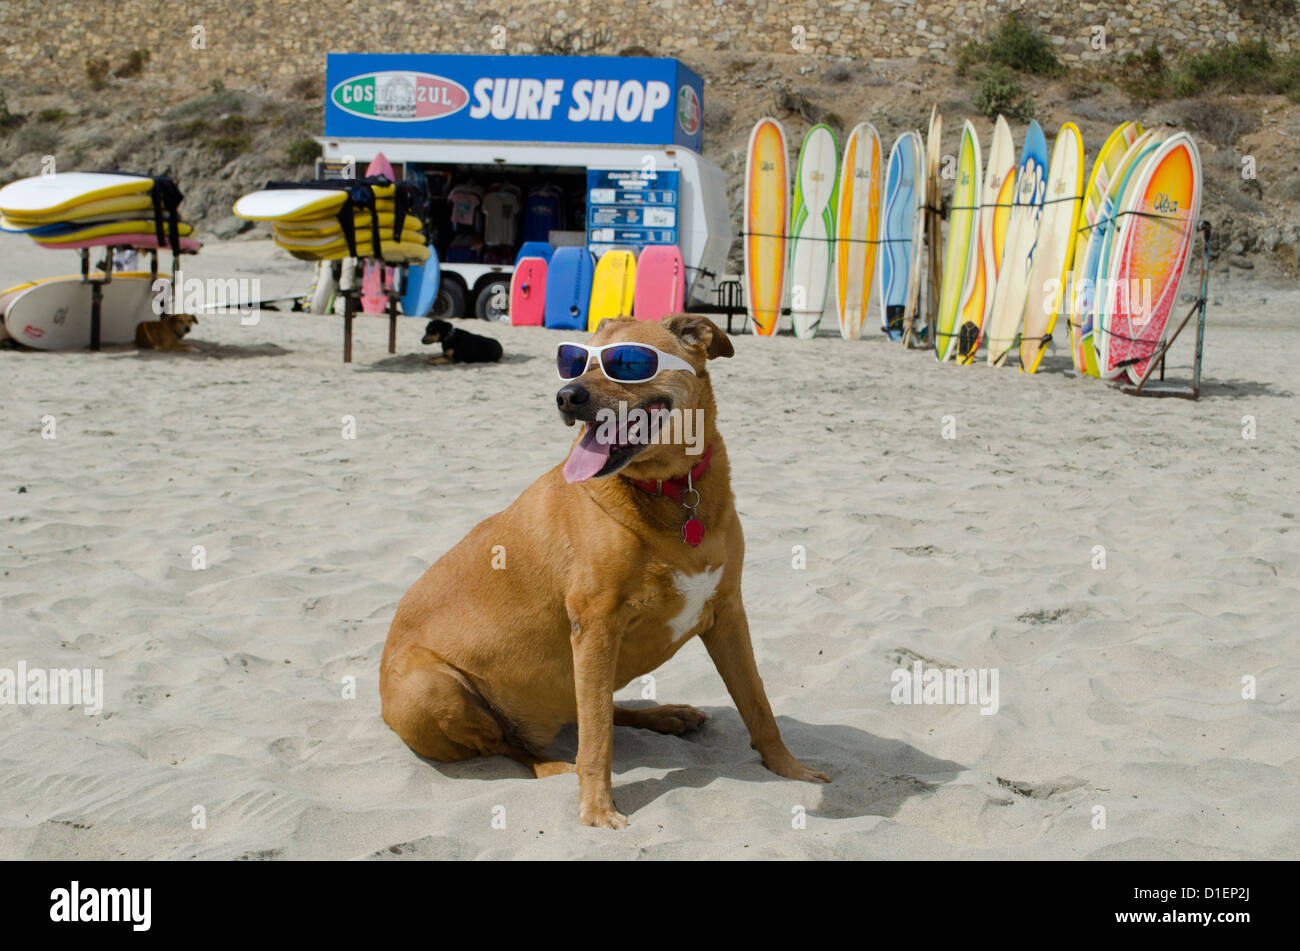 Dog with sunglasses in front of beach surfing shop Stock Photo